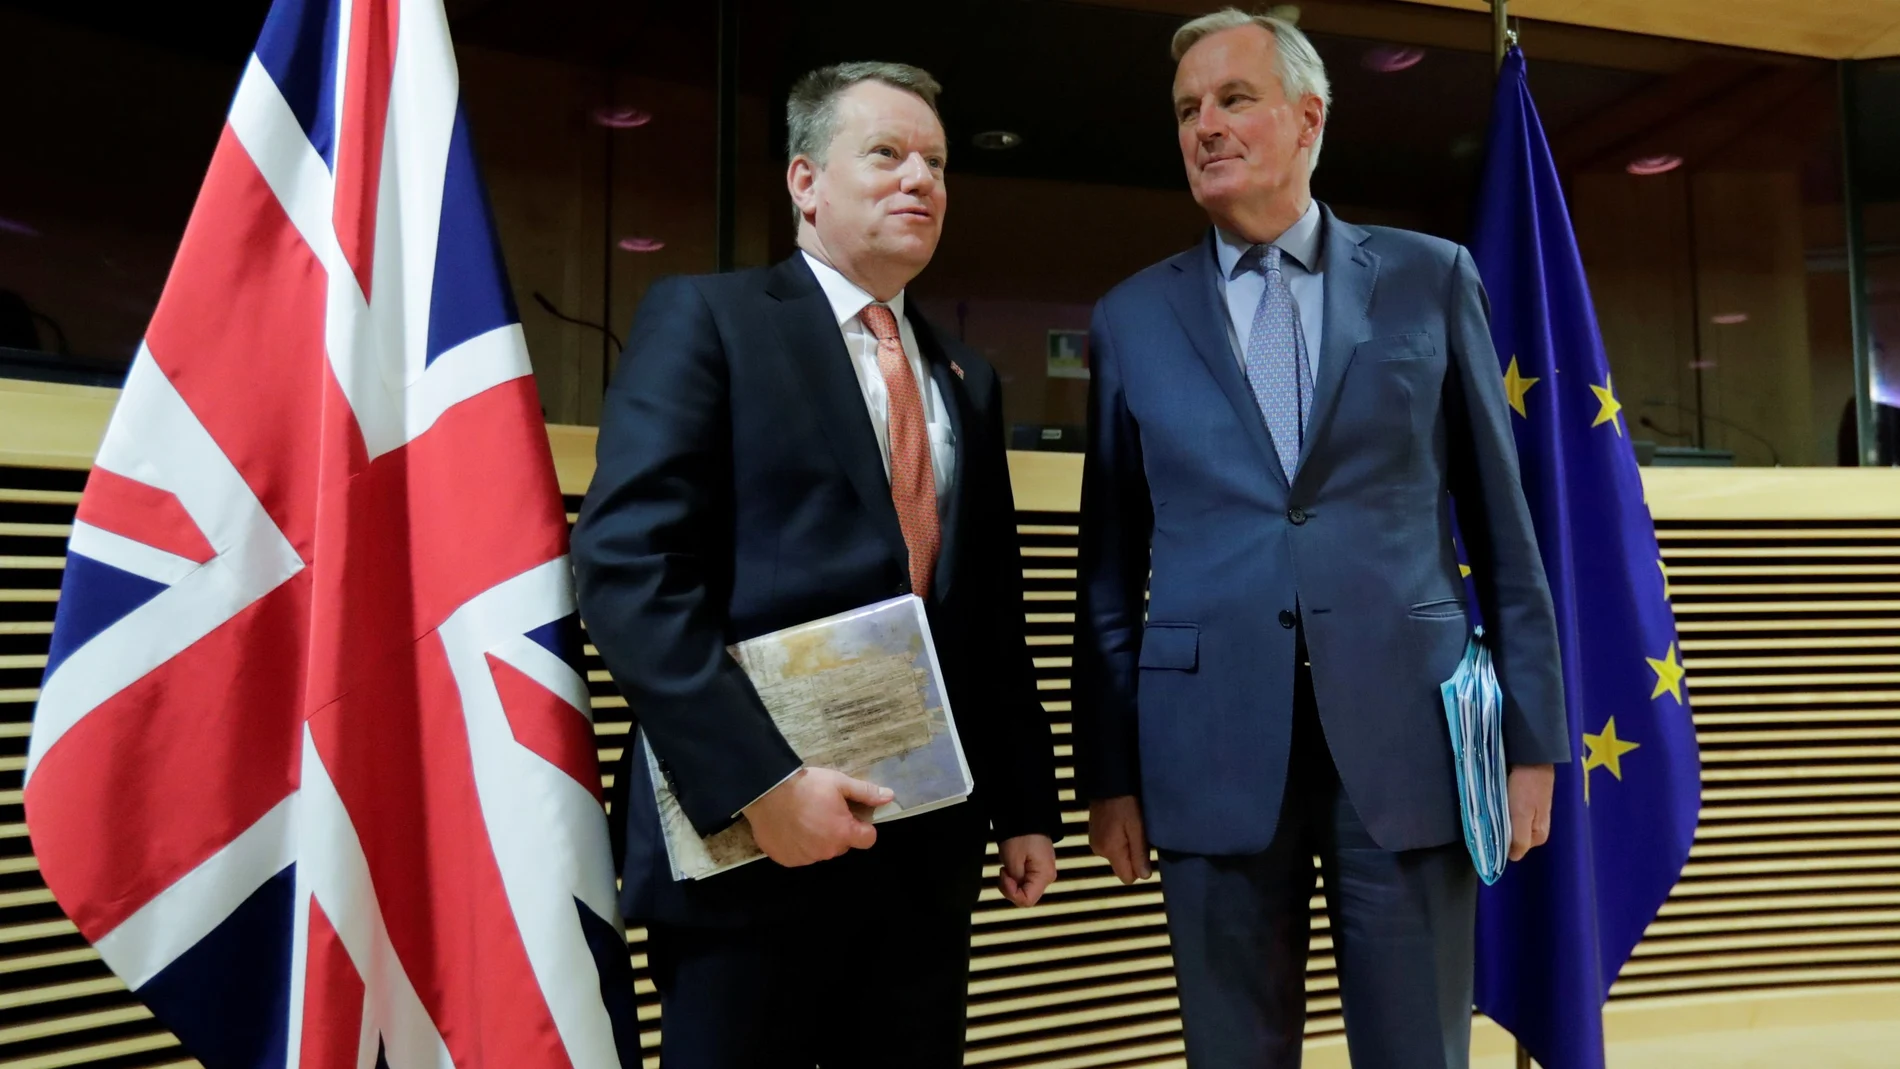 FILE PHOTO: European Union chief Brexit negotiator Michel Barnier and British Prime Minister's Europe adviser David Frost 5 are seen at start of the first round of post -Brexit trade deal talks